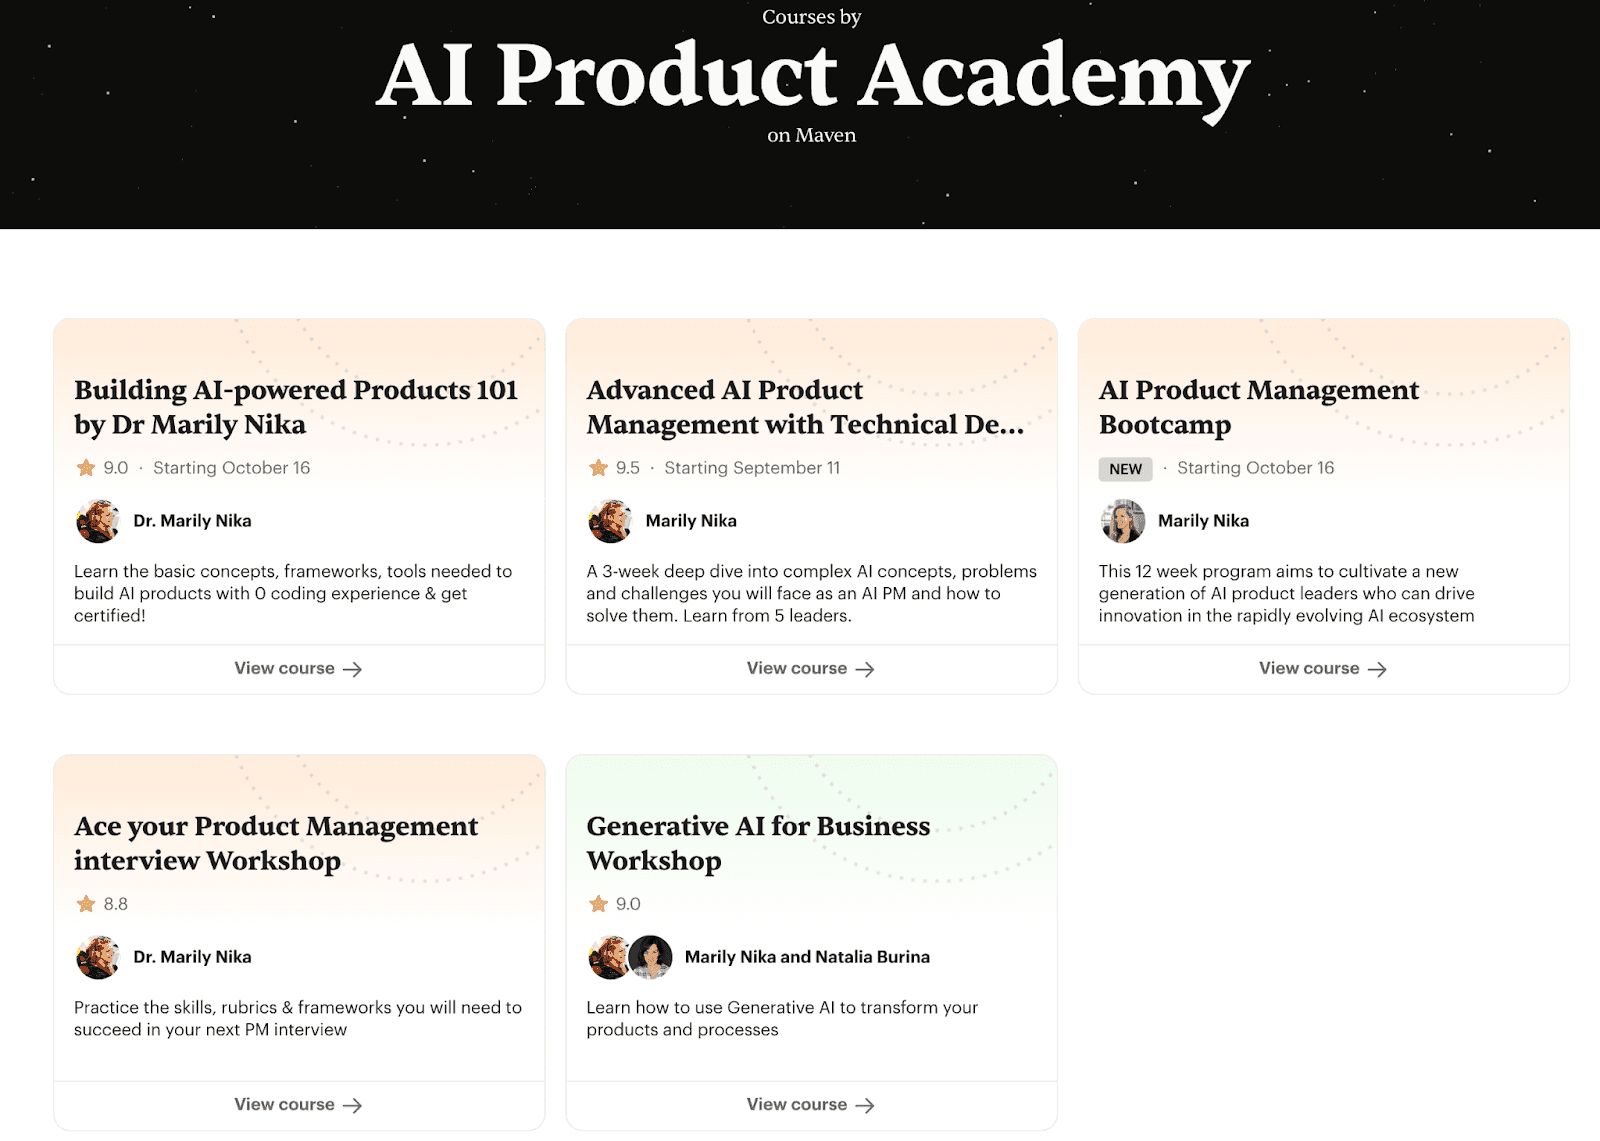 Maven AI product academy with workshops listed